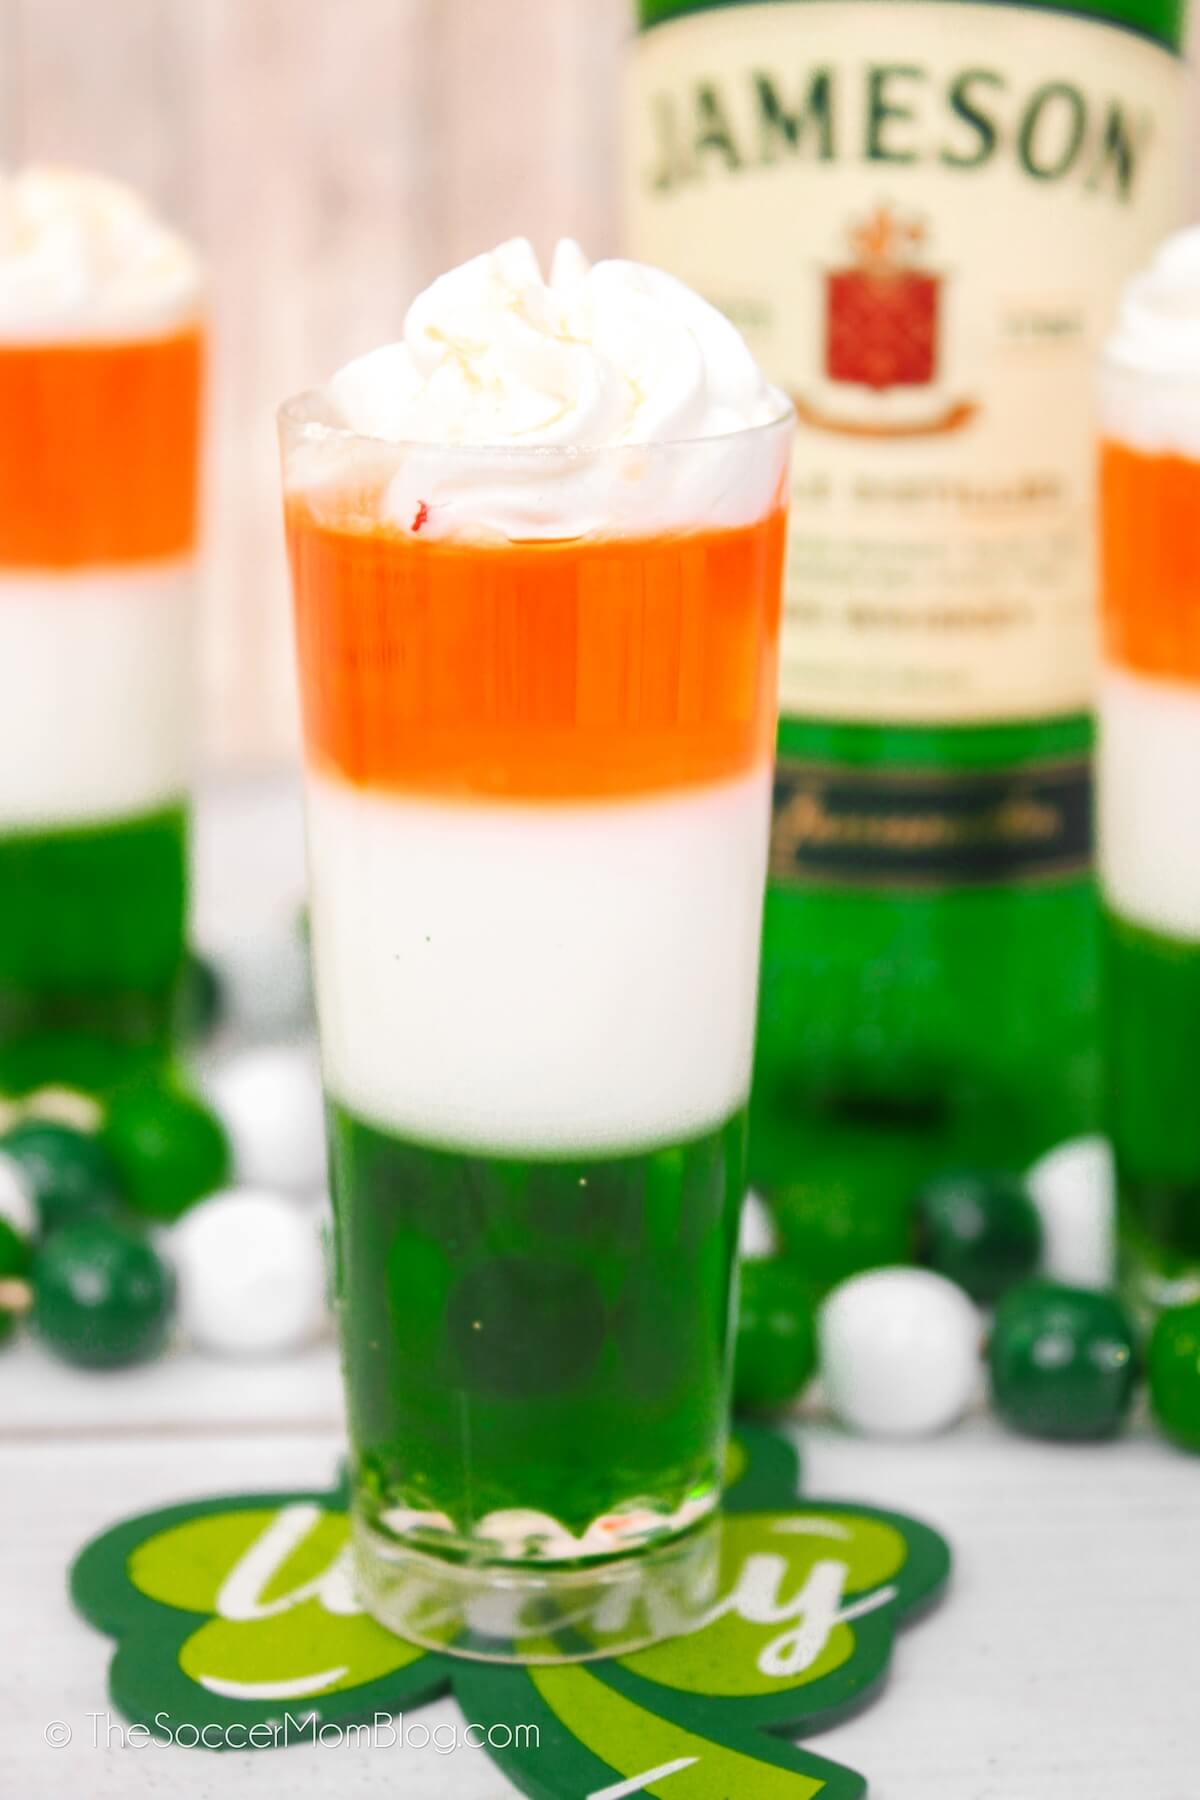 layered St. Patrick's Day jello shots in the colors of the Irish flag, with Jameson bottle in background